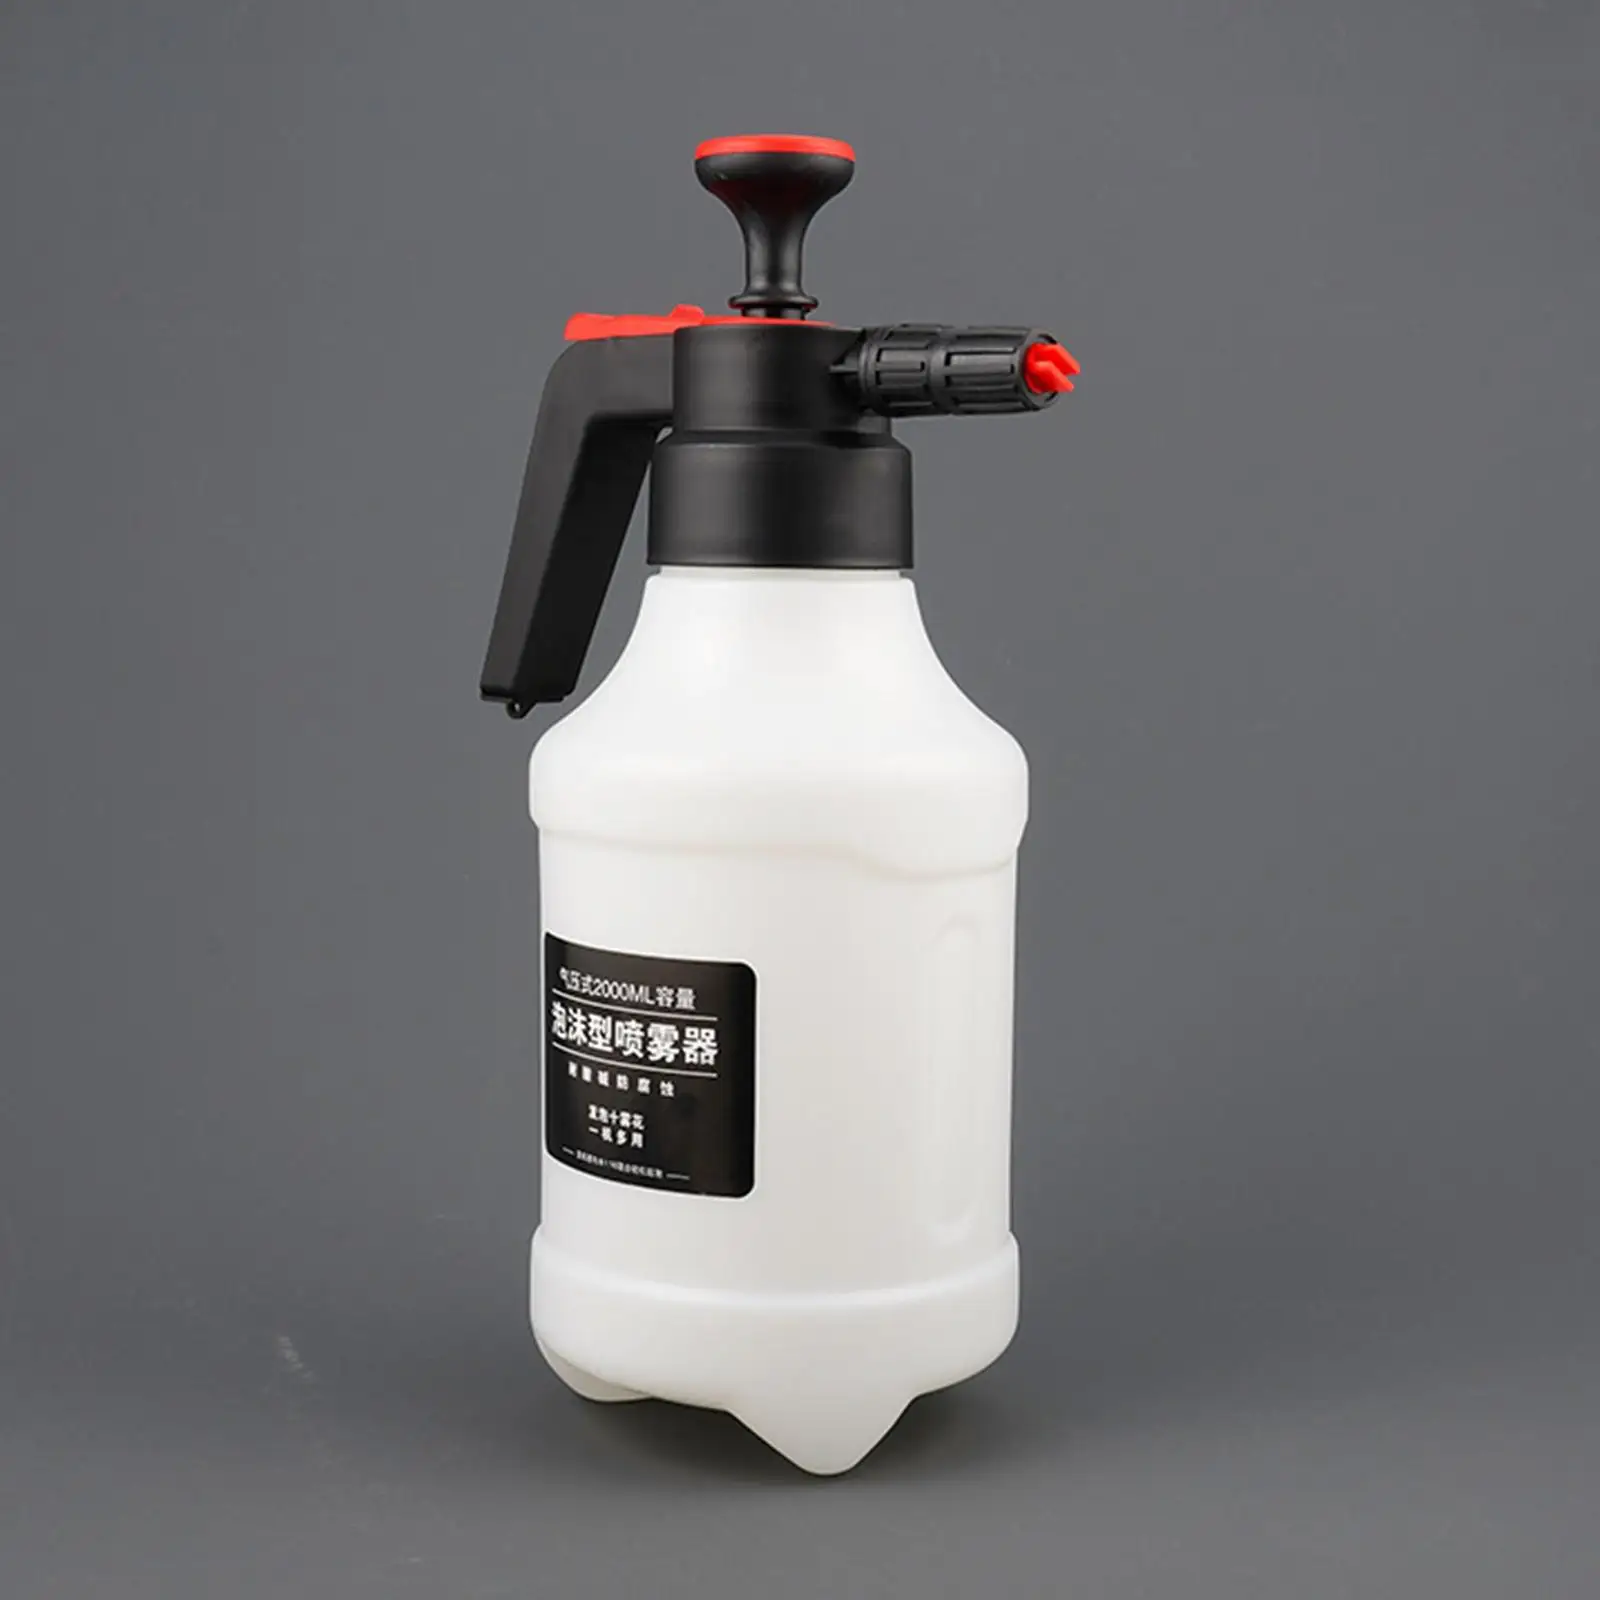 Car Wash Pump Manual Foaming Sprayer Air Pressure Plastic Spray Bottle with 3 Nozzle Portable for Garden Lawn House Cleaning